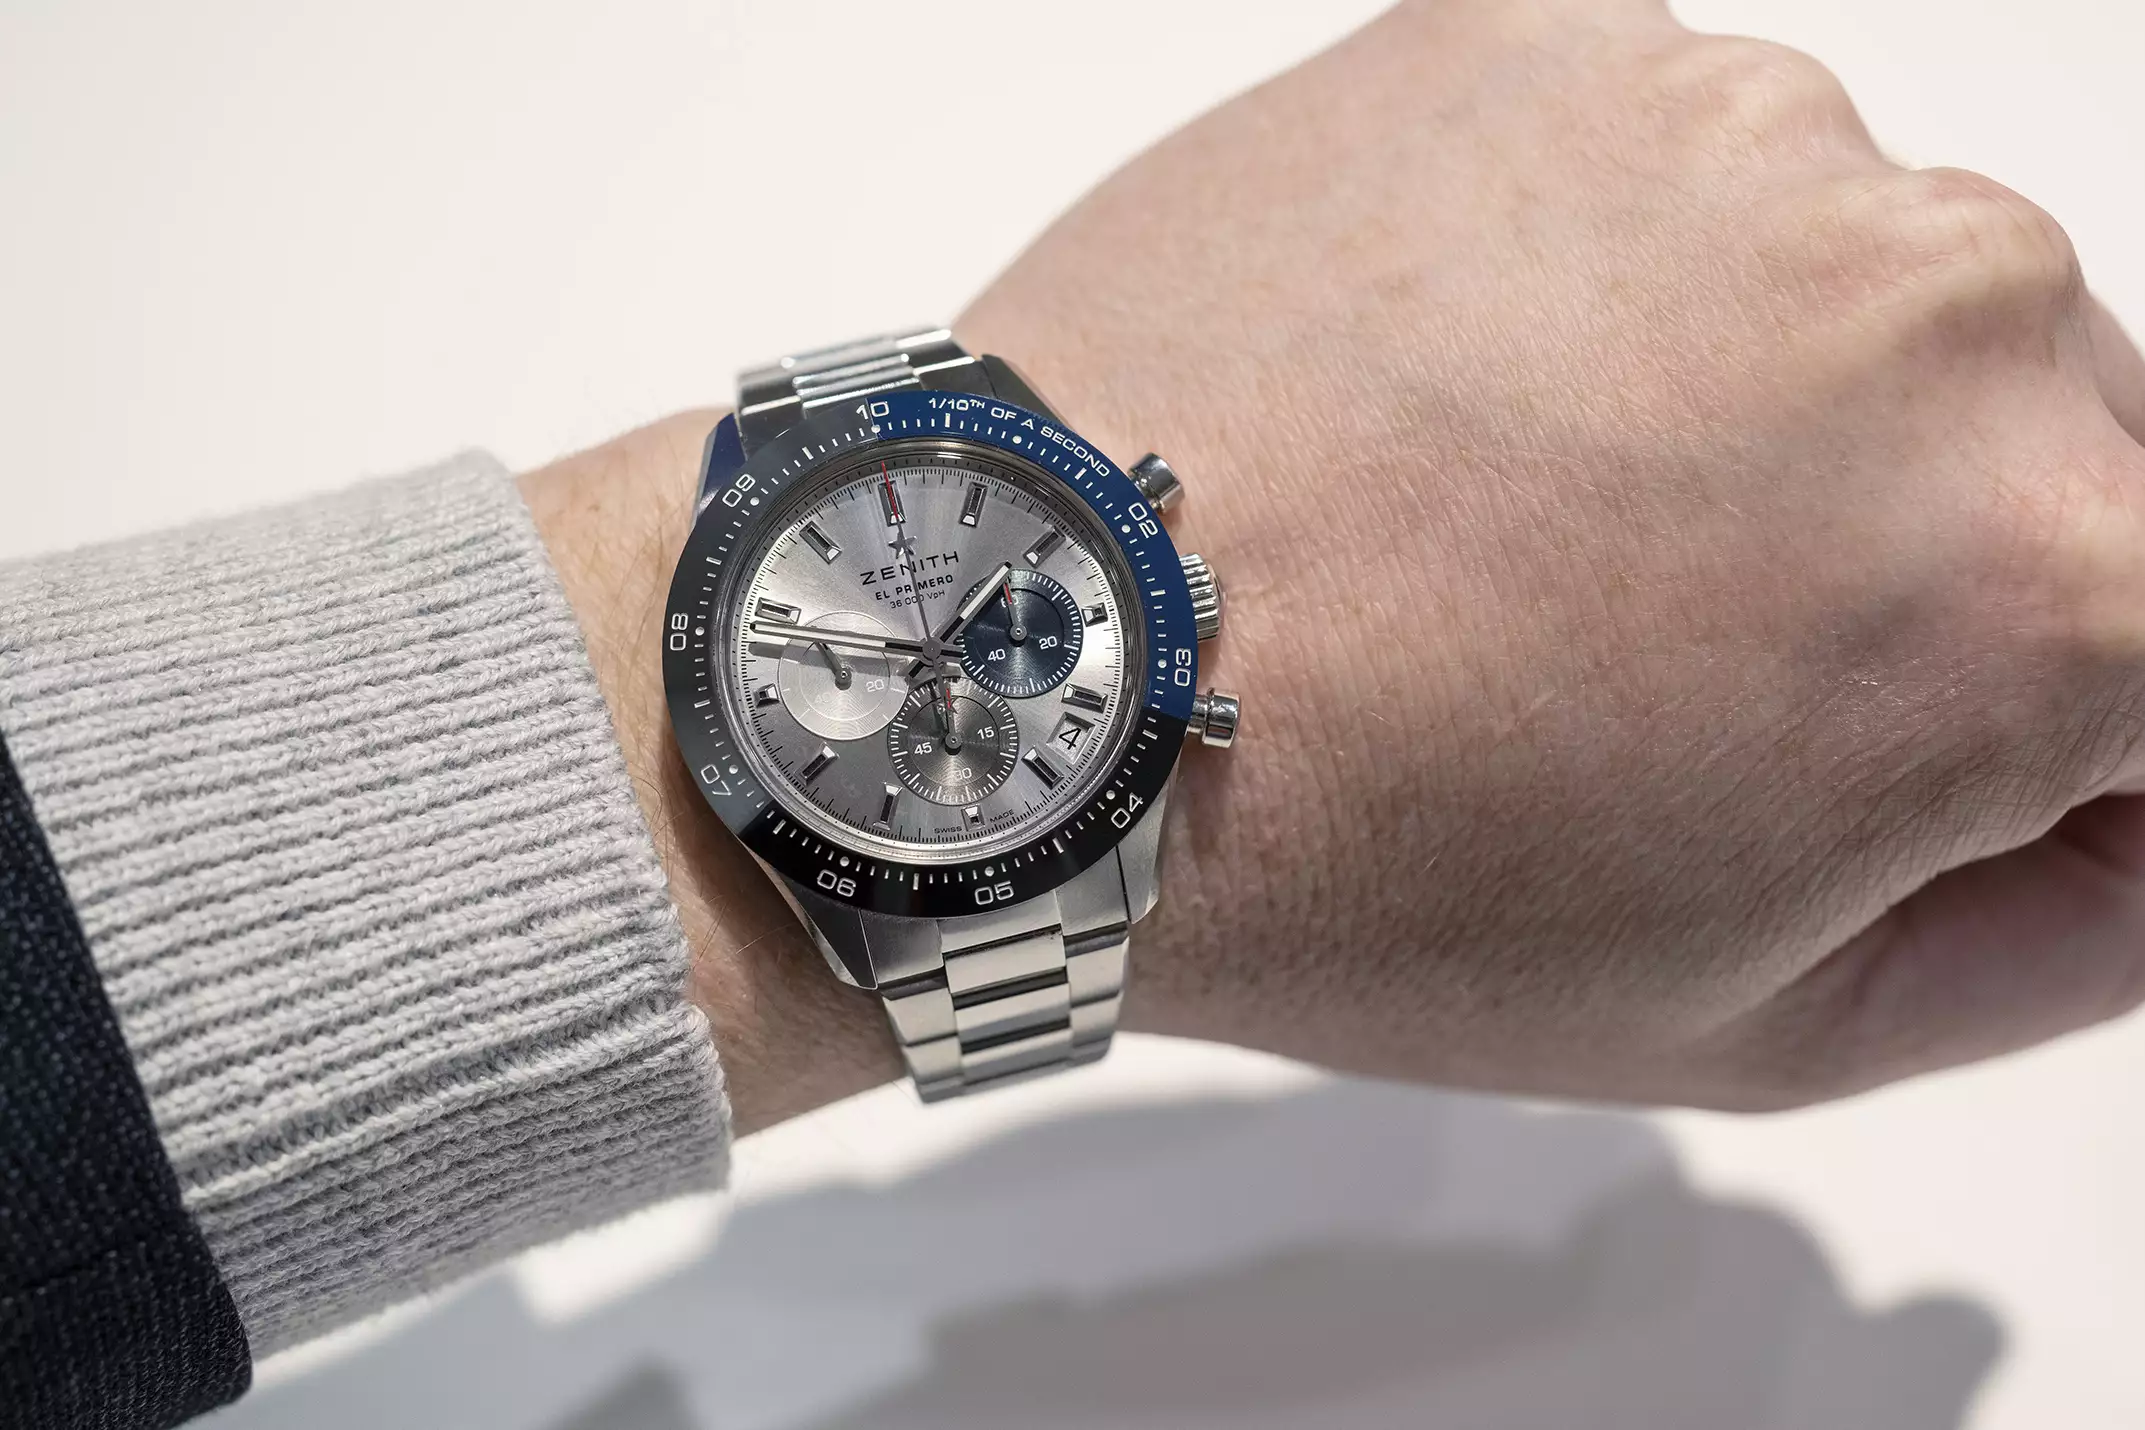 Hands On Review of The Zenith Defy Skyline Boutique Edition